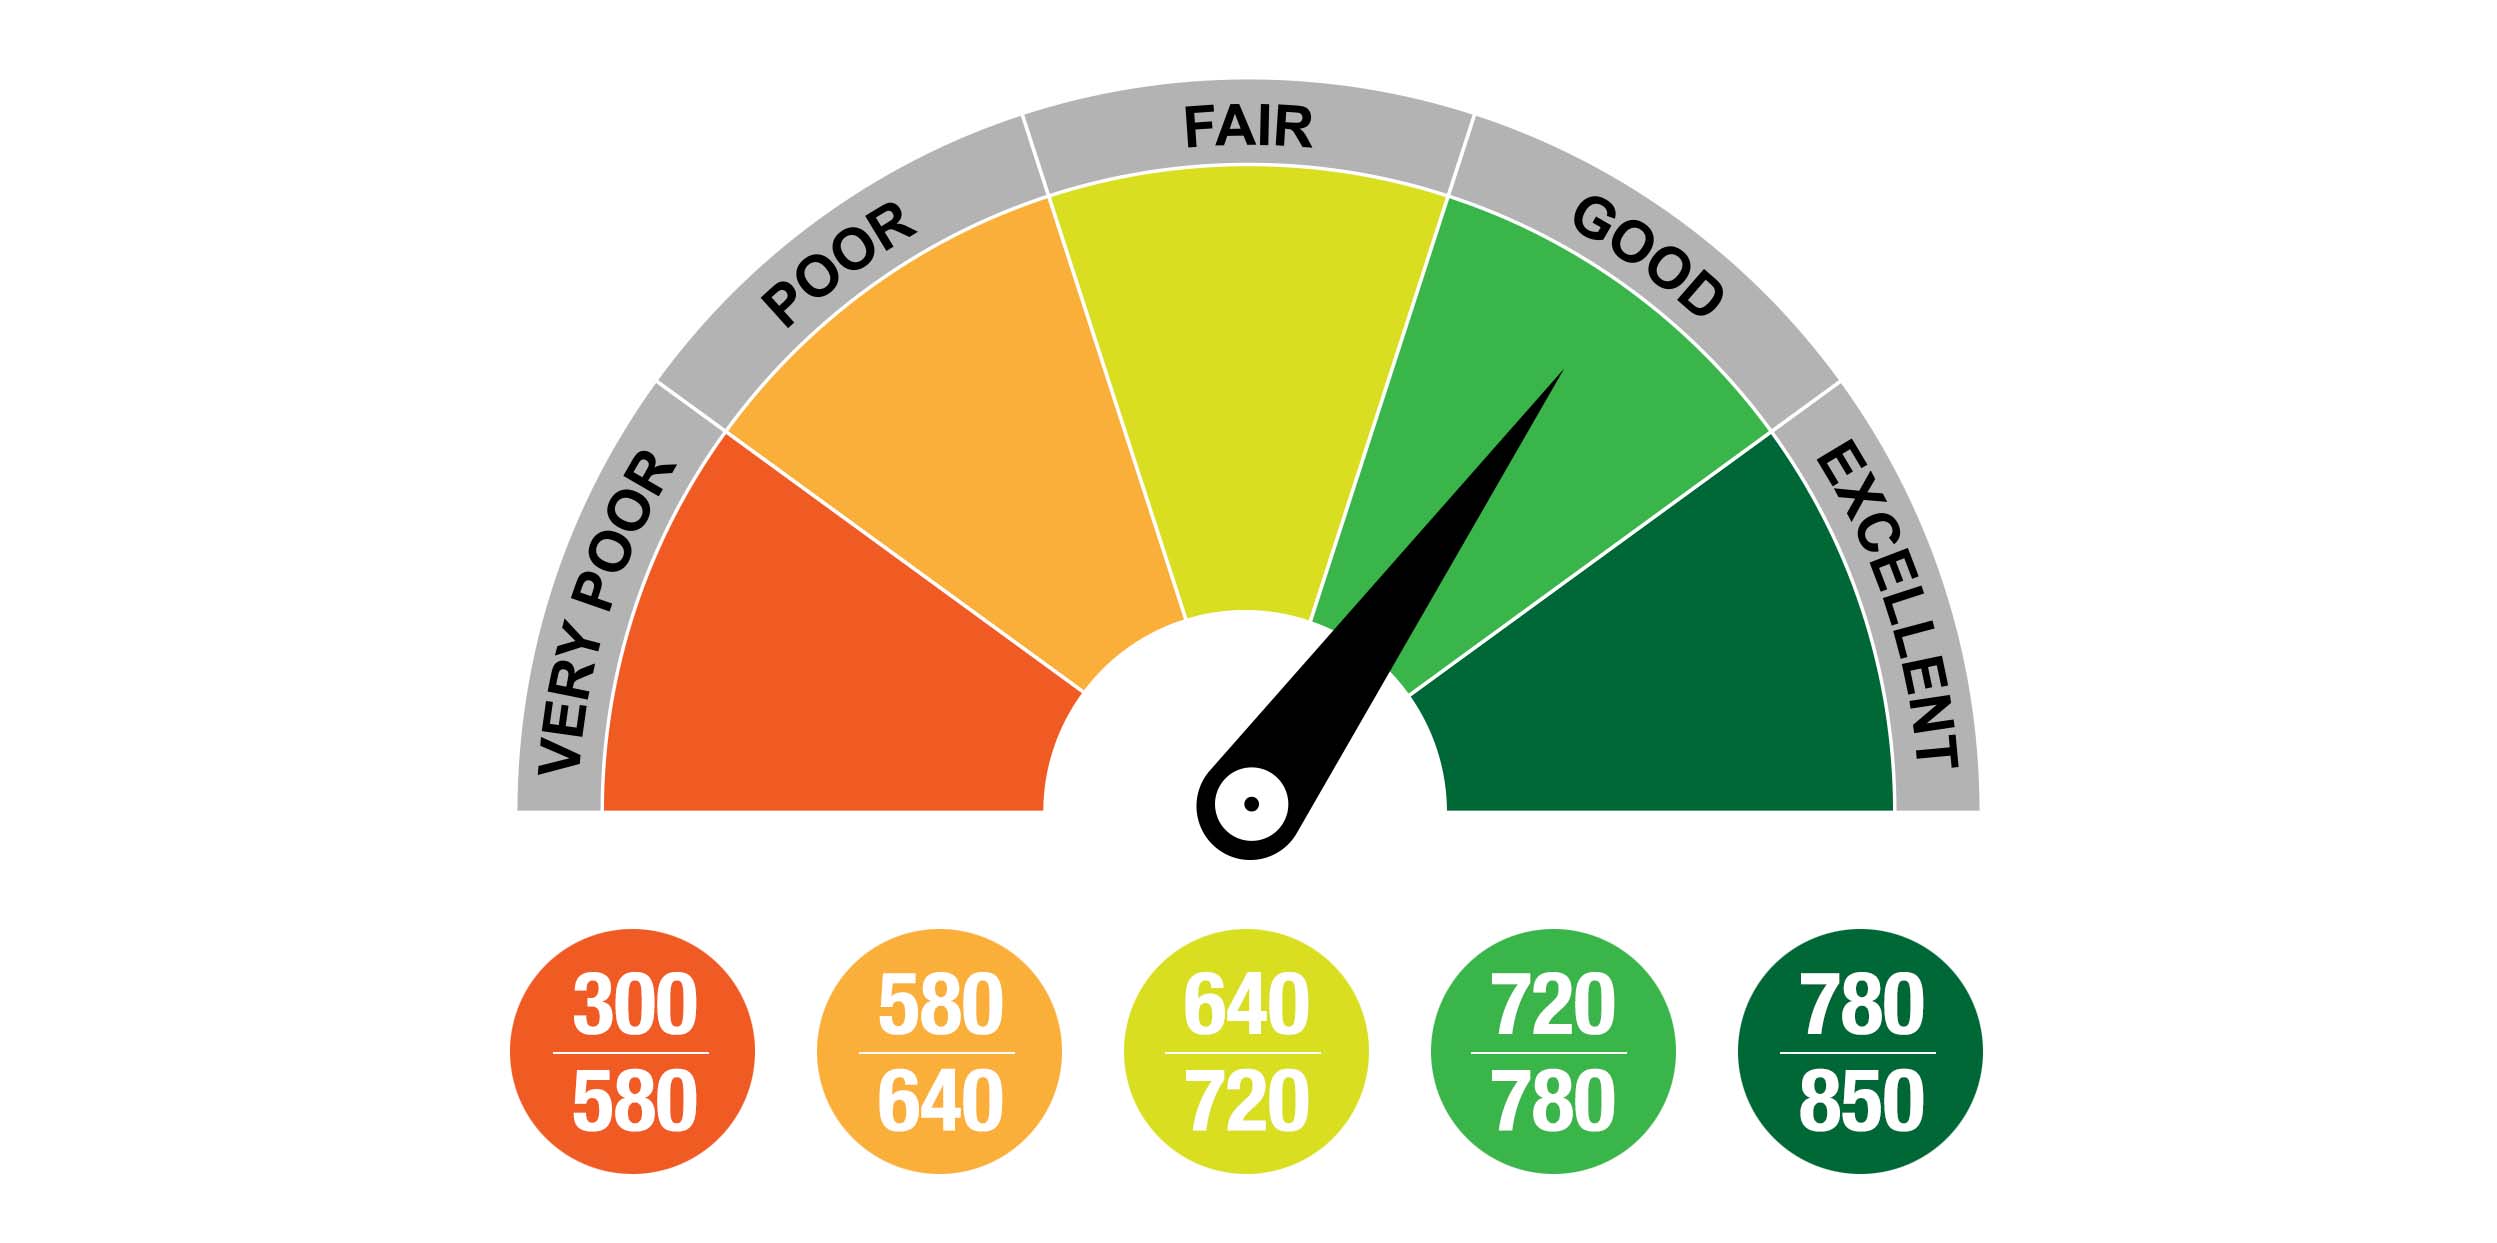 How to Improve Your Credit Score | Lawler \u0026 Co.